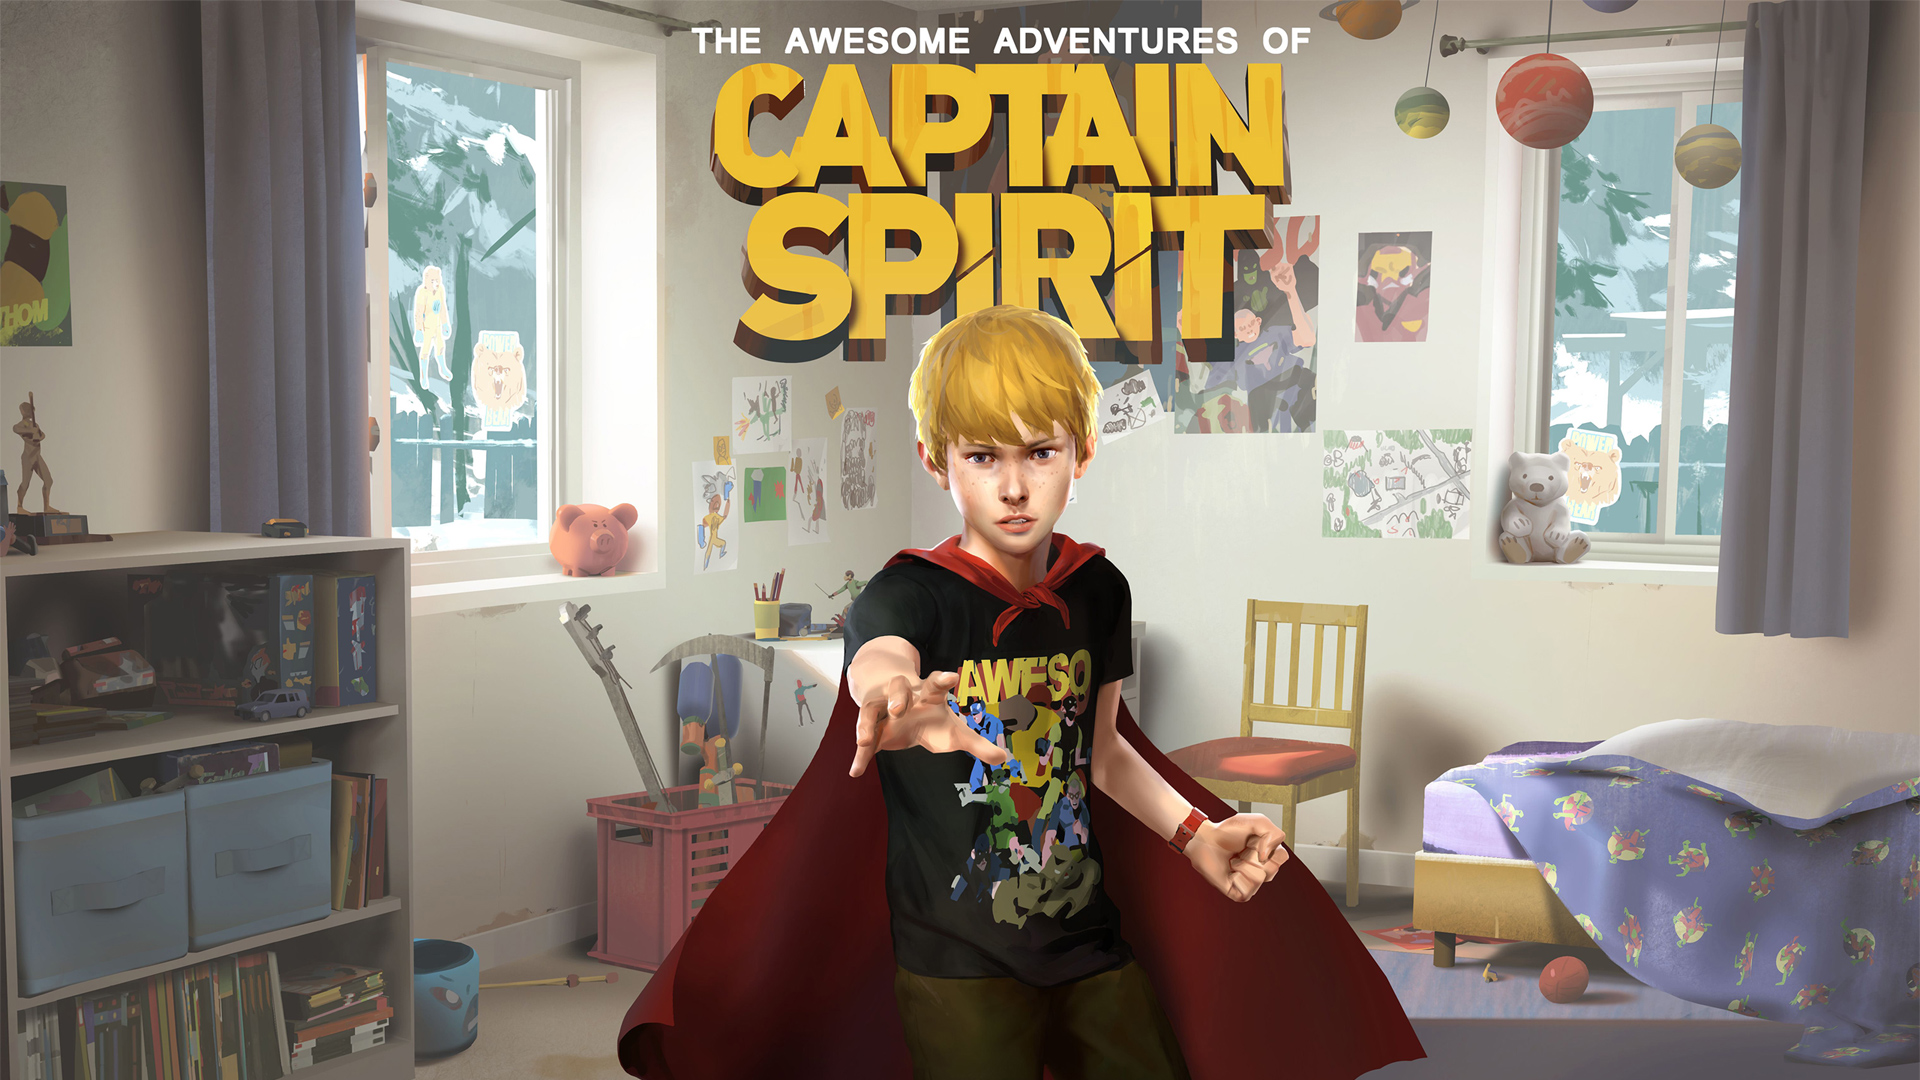 Captain Spirit Wallpaper From The Awesome Adventures Of